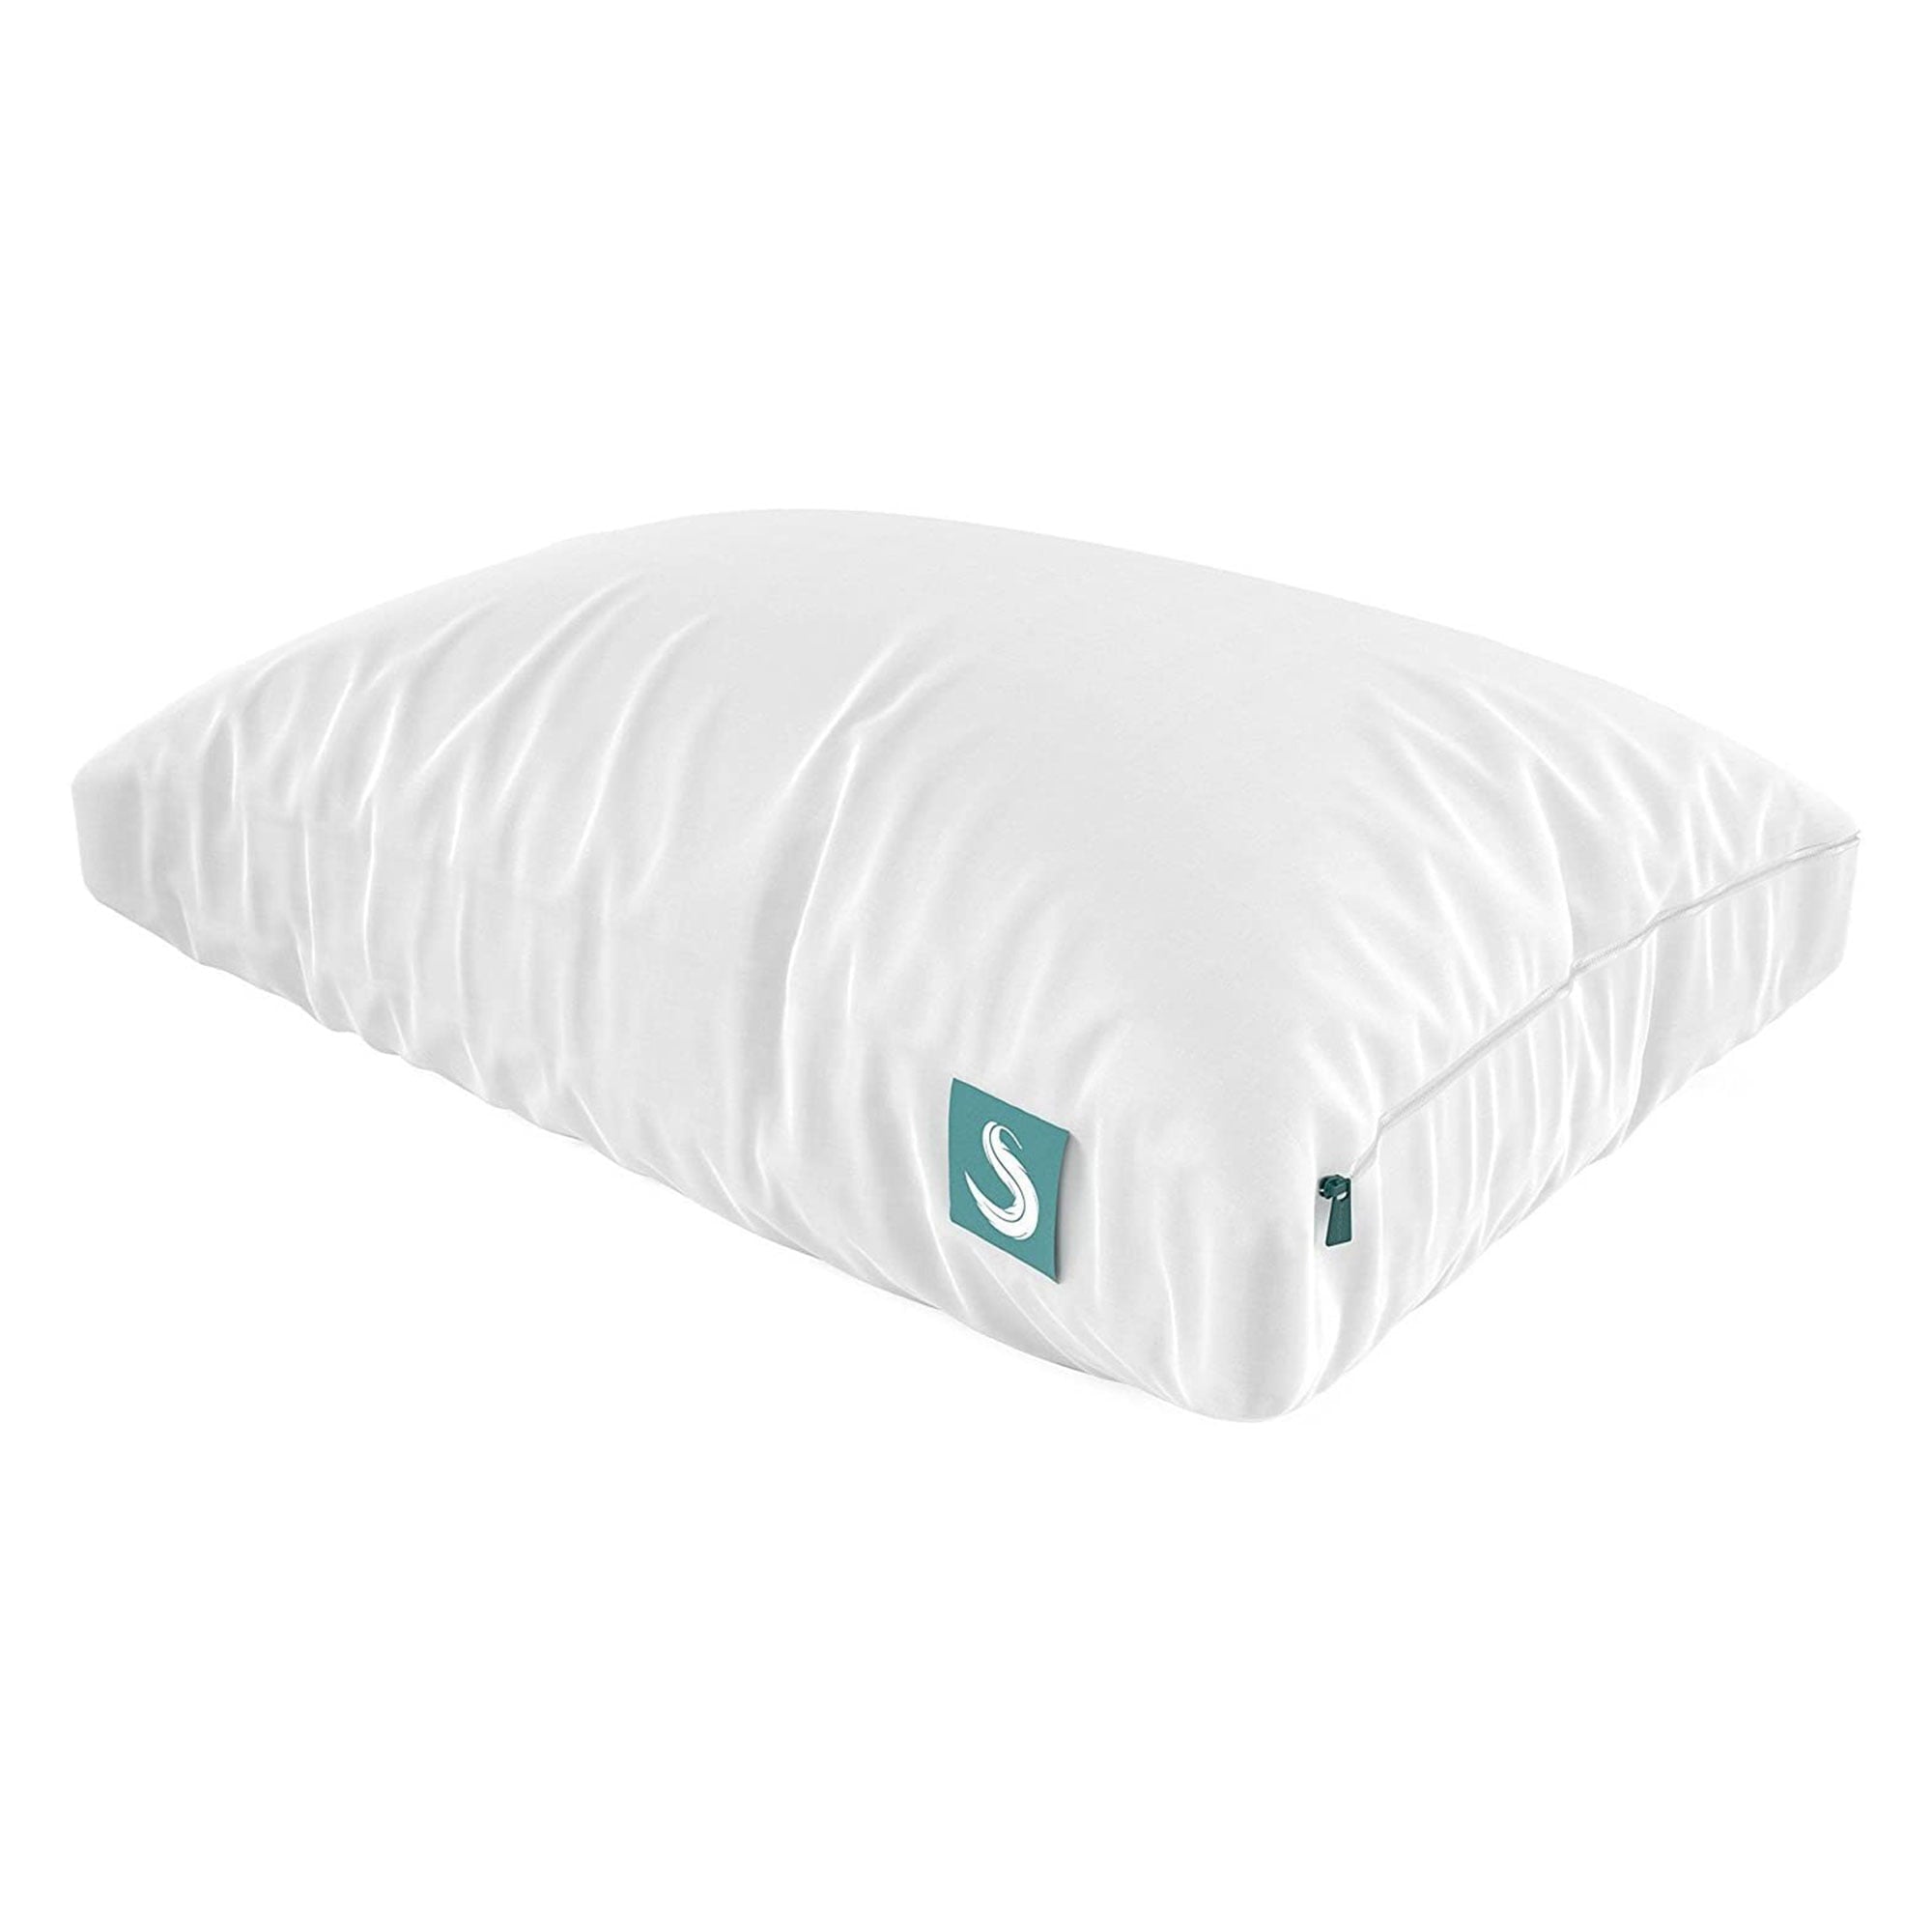 Sleepgram Bed Support Sleeping Pillow with Microfiber Cover, King, White